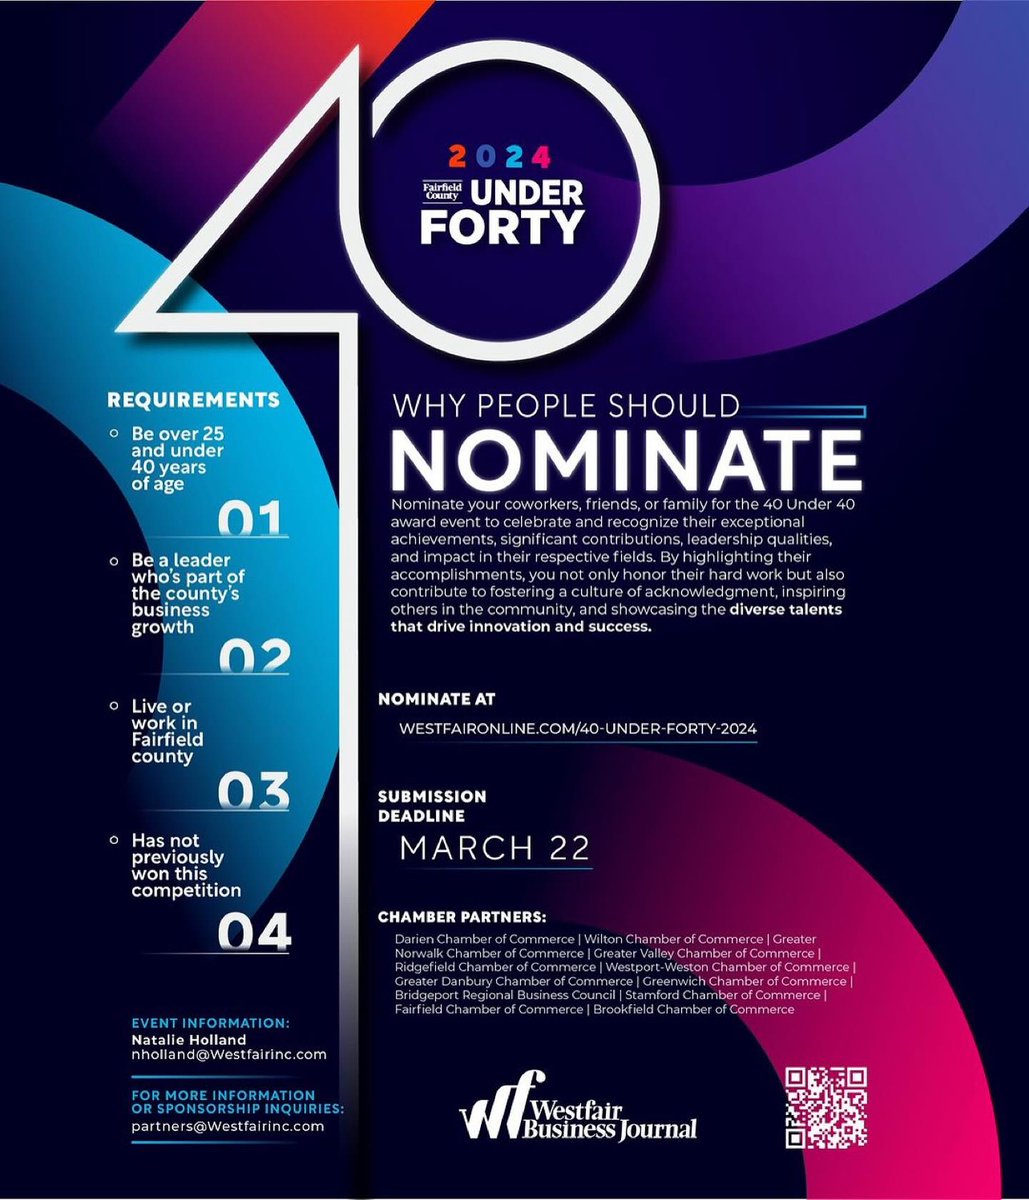 Nominate someone under forty years of age to be recognized for outstanding leadership skills. The deadline for submissions is March 22nd. #darien #darienct #livedarien #fairfieldcounty #shoplocal #shopdarien #fortyunderforty #westfairbusinessjournal